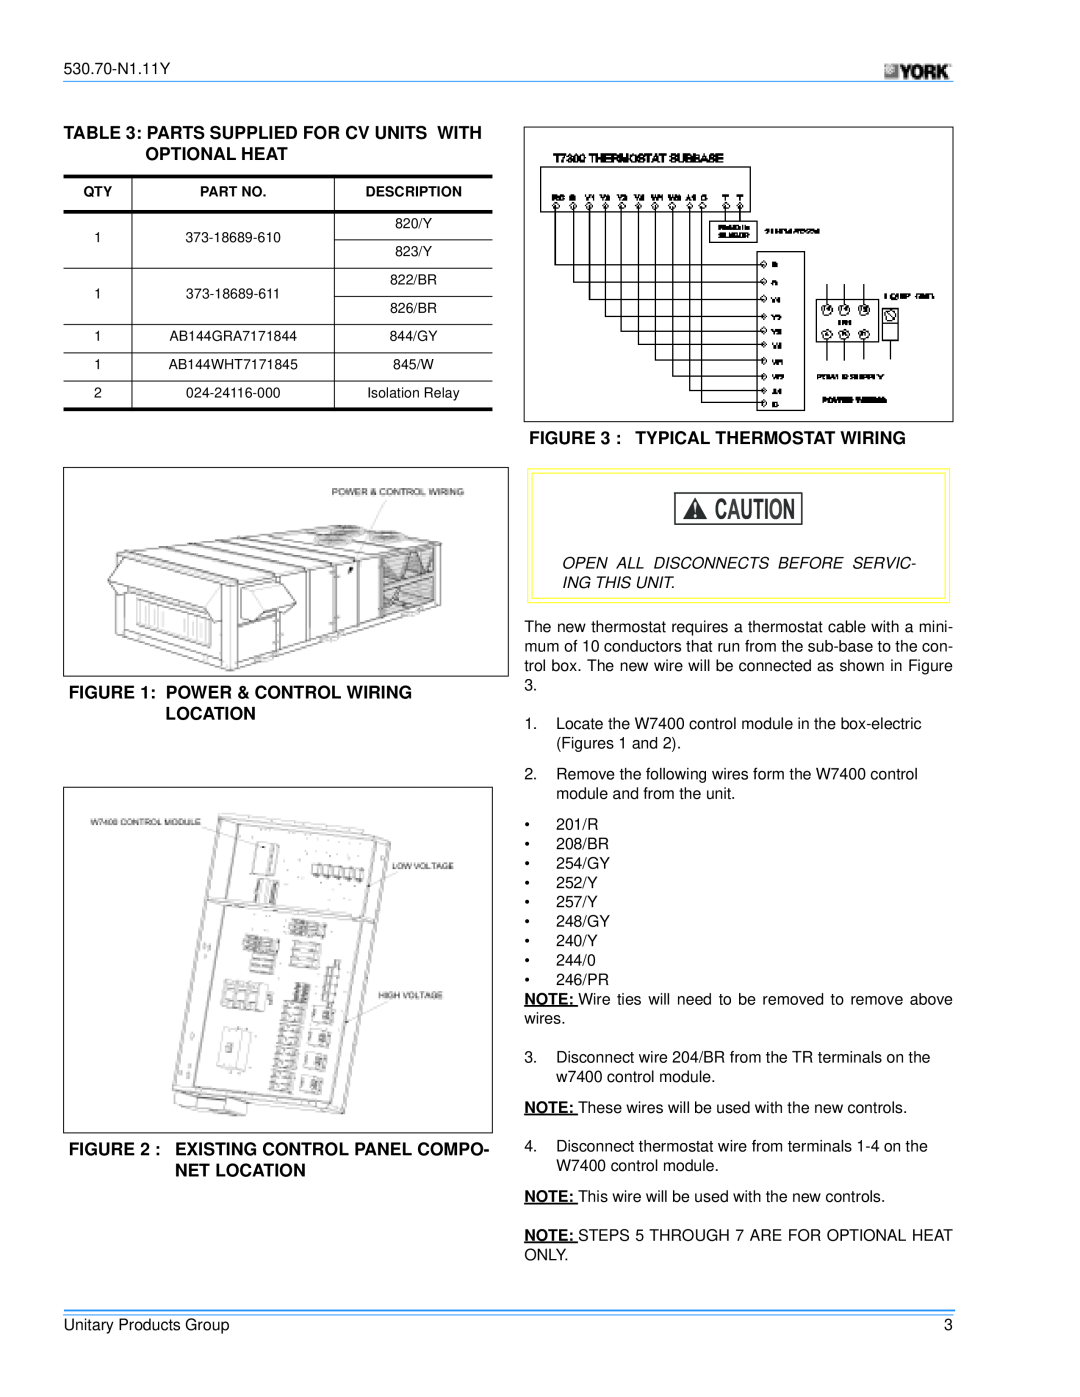 Millennium Enterprises STYLE C, Y13, Y14, STYLE B, STYLE A manual Power & Control Wiring Location, Typical Thermostat Wiring 